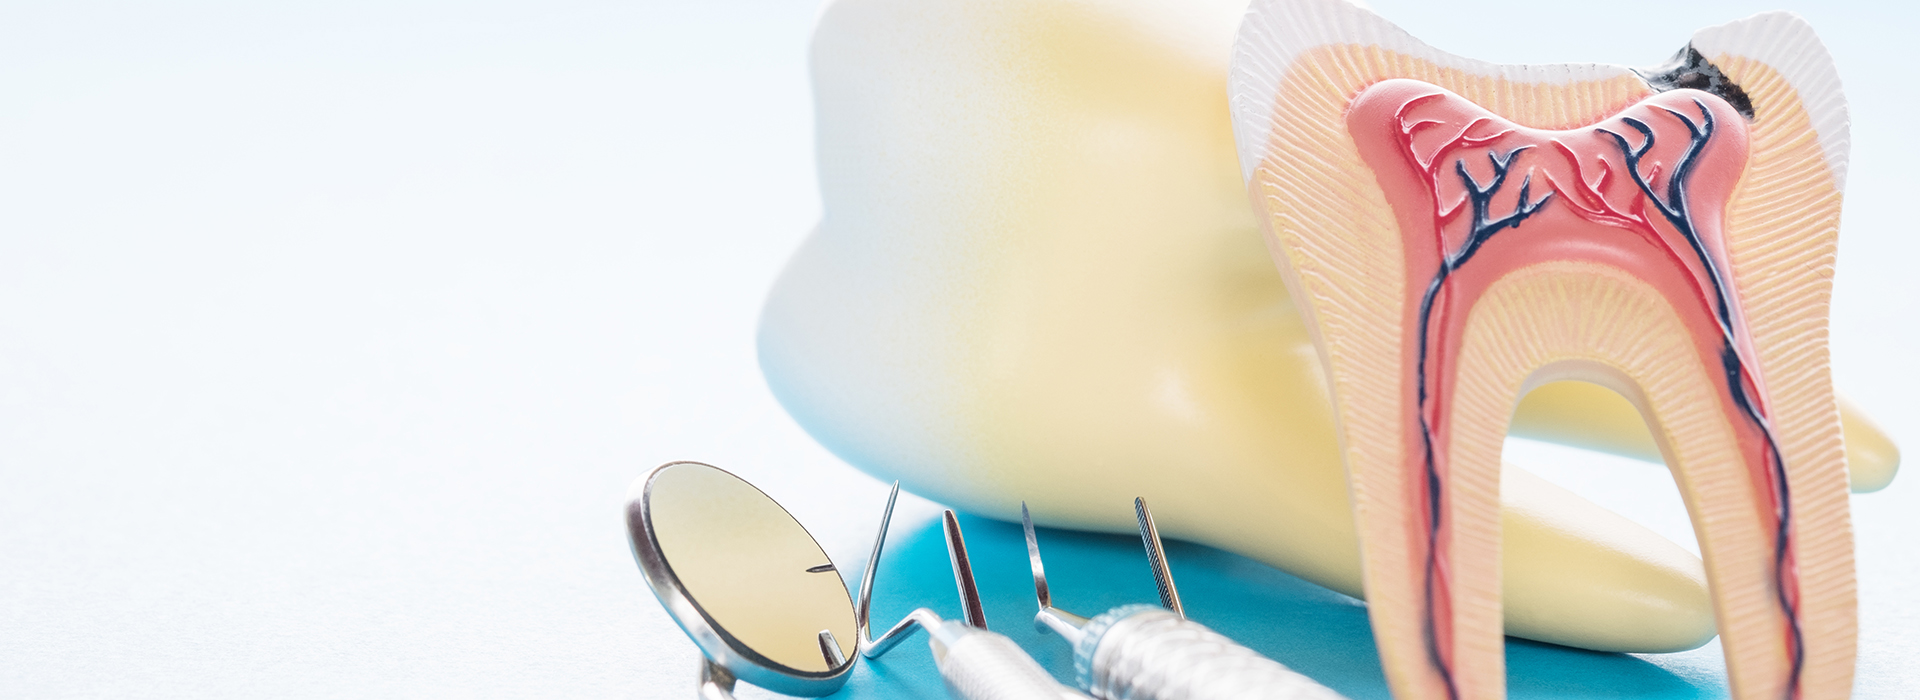 An image featuring a toothbrush, dental floss, and a mouth model with a cavity, set against a blue background.